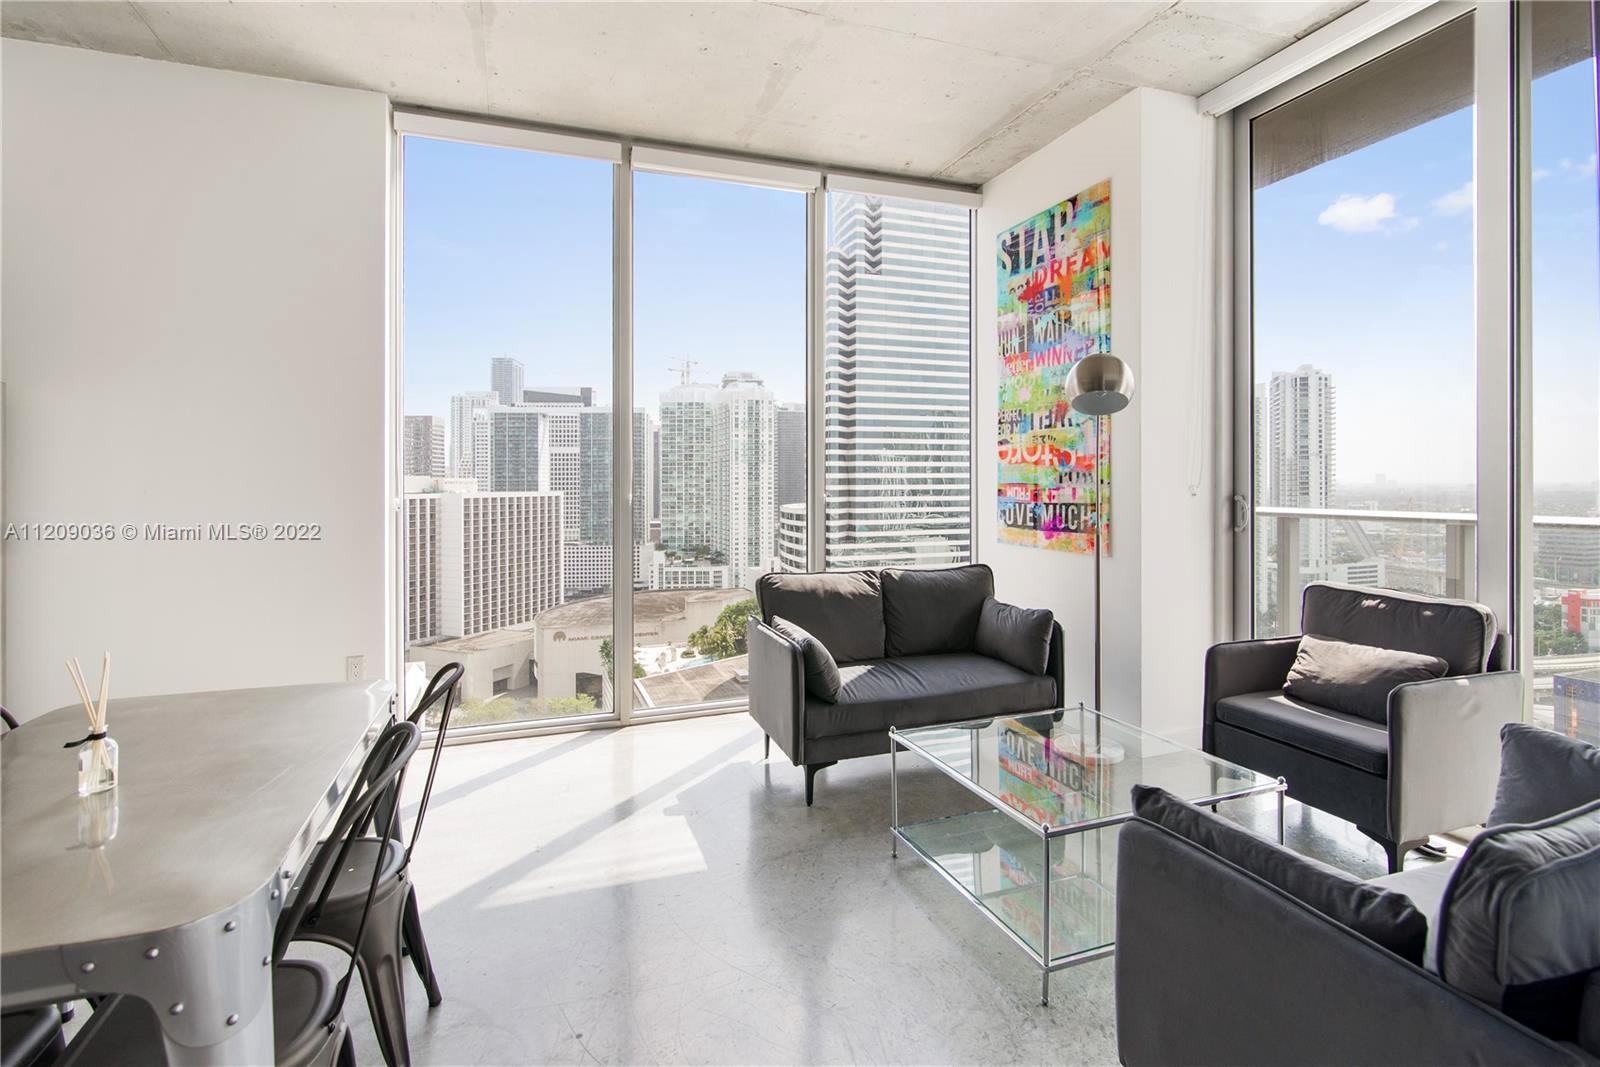 Spectacular 2Br/2Ba apartment with an open floor plan located at Centro condo, in the heart of Downtown Miami. This unit is offered for sale fully furnished!!! It features stainless steel energy- smart appliances, Italian kitchen & bathroom cabinetry and a spectacular view. Washer & dryer inside. This full-service luxury condo has a 24- hour concierge and 5 stars amenities- rooftop pool, sauna, a fitness center, breathtaking views of the City, elevators, and 24hr security. Walking distance to many restaurants, Bay Front Park and Adrienne Arsht Center. Rentals are allowed right away, 12 times a year, 30 days minimum. The unit is currently rented until March 21, 2023 at $4,000/month. Call today to schedule a tour!